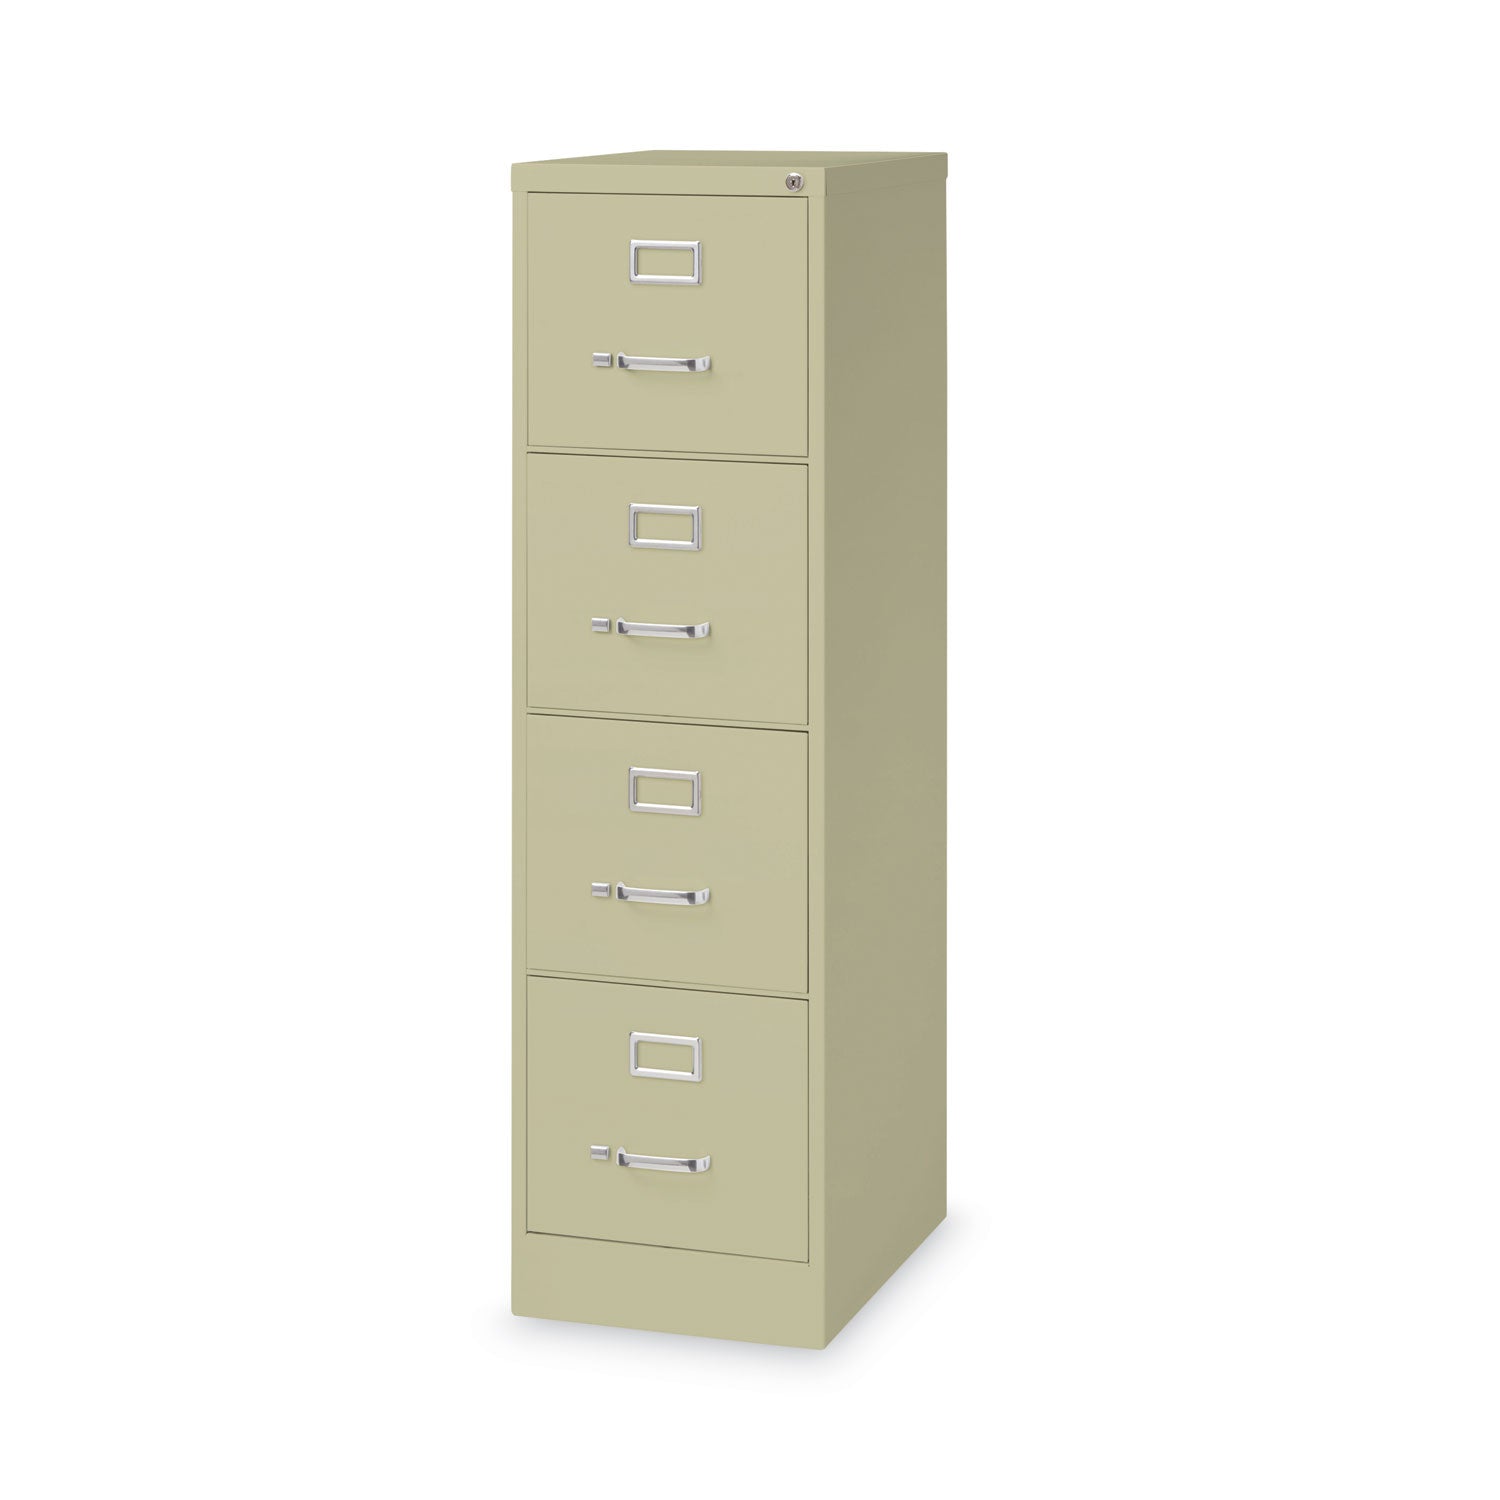 vertical-letter-file-cabinet-4-letter-size-file-drawers-putty-15-x-22-x-52_hid17891 - 2